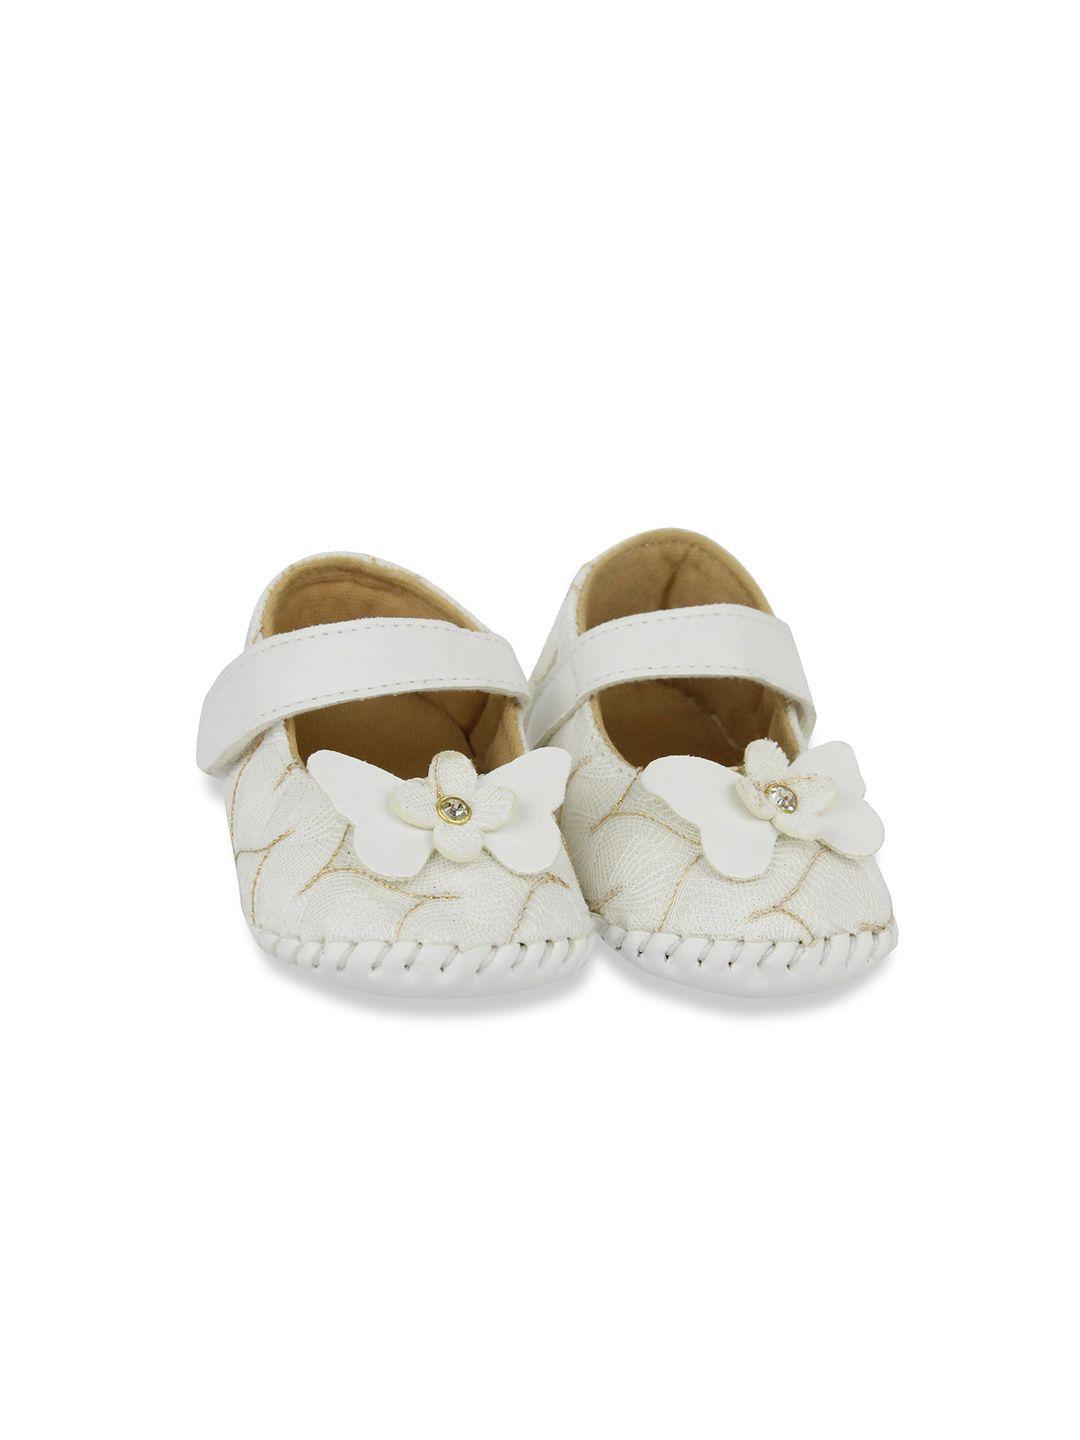 baesd infant girls bow embellished booties